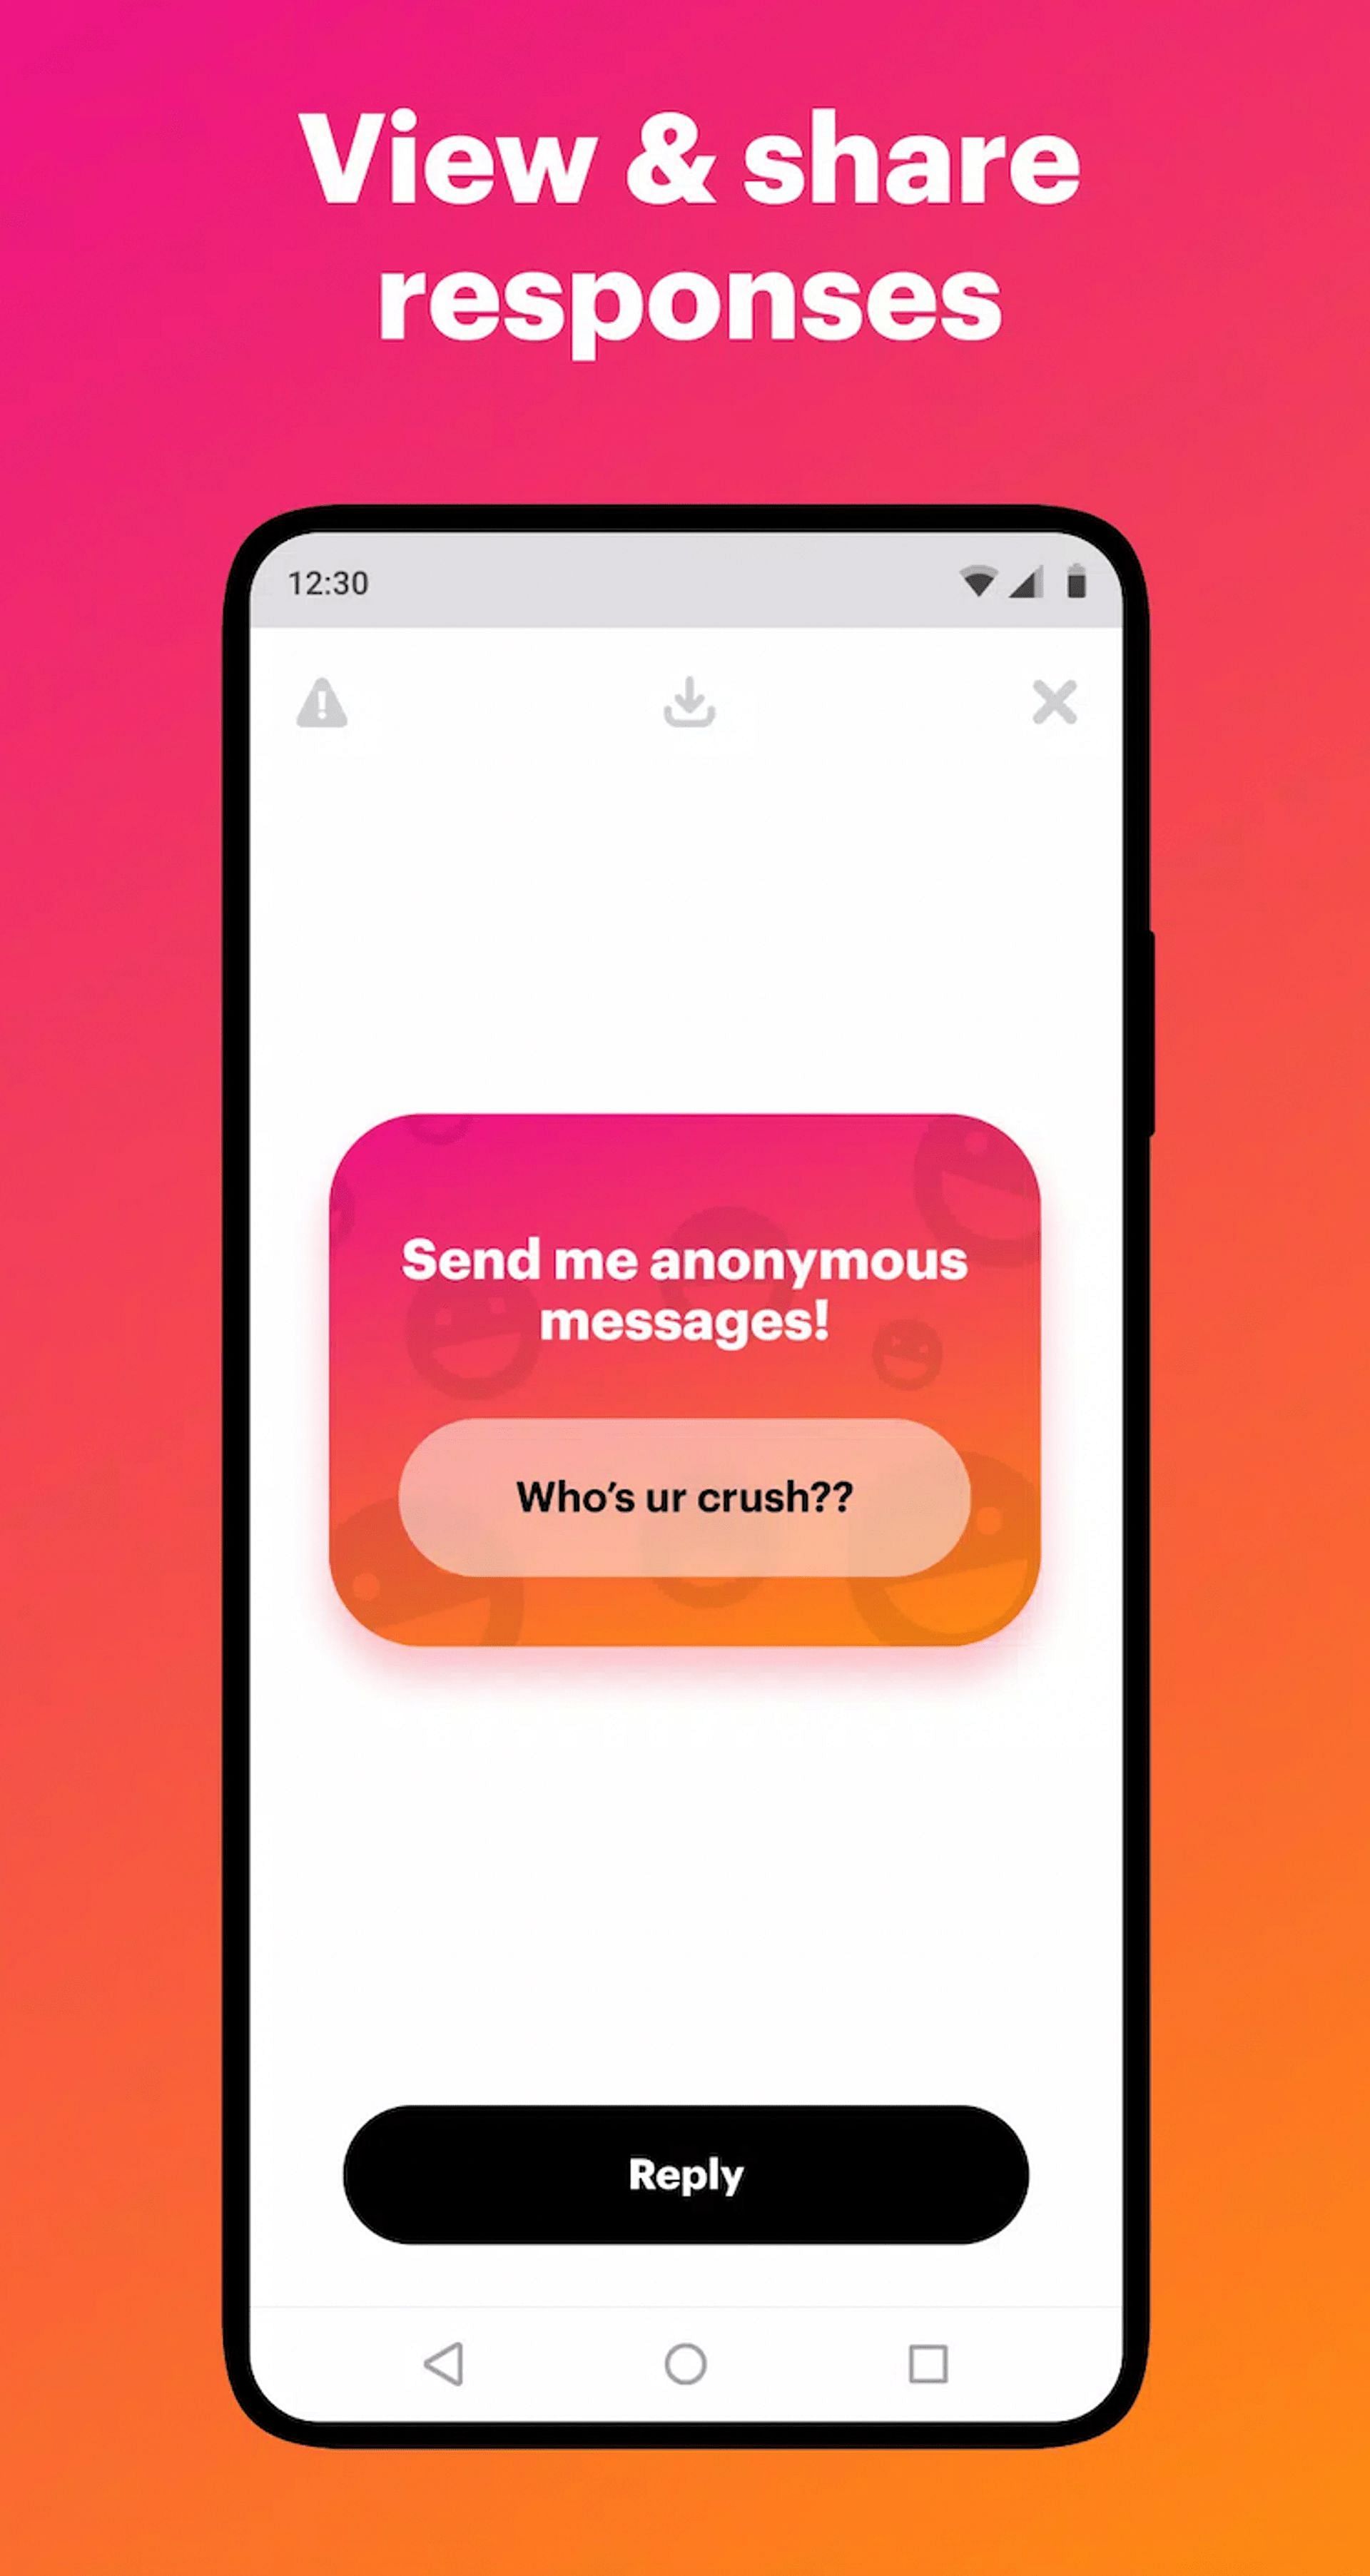 Users using the NGL app to post questions to which answers would be anonymous. (Image via NGL app)